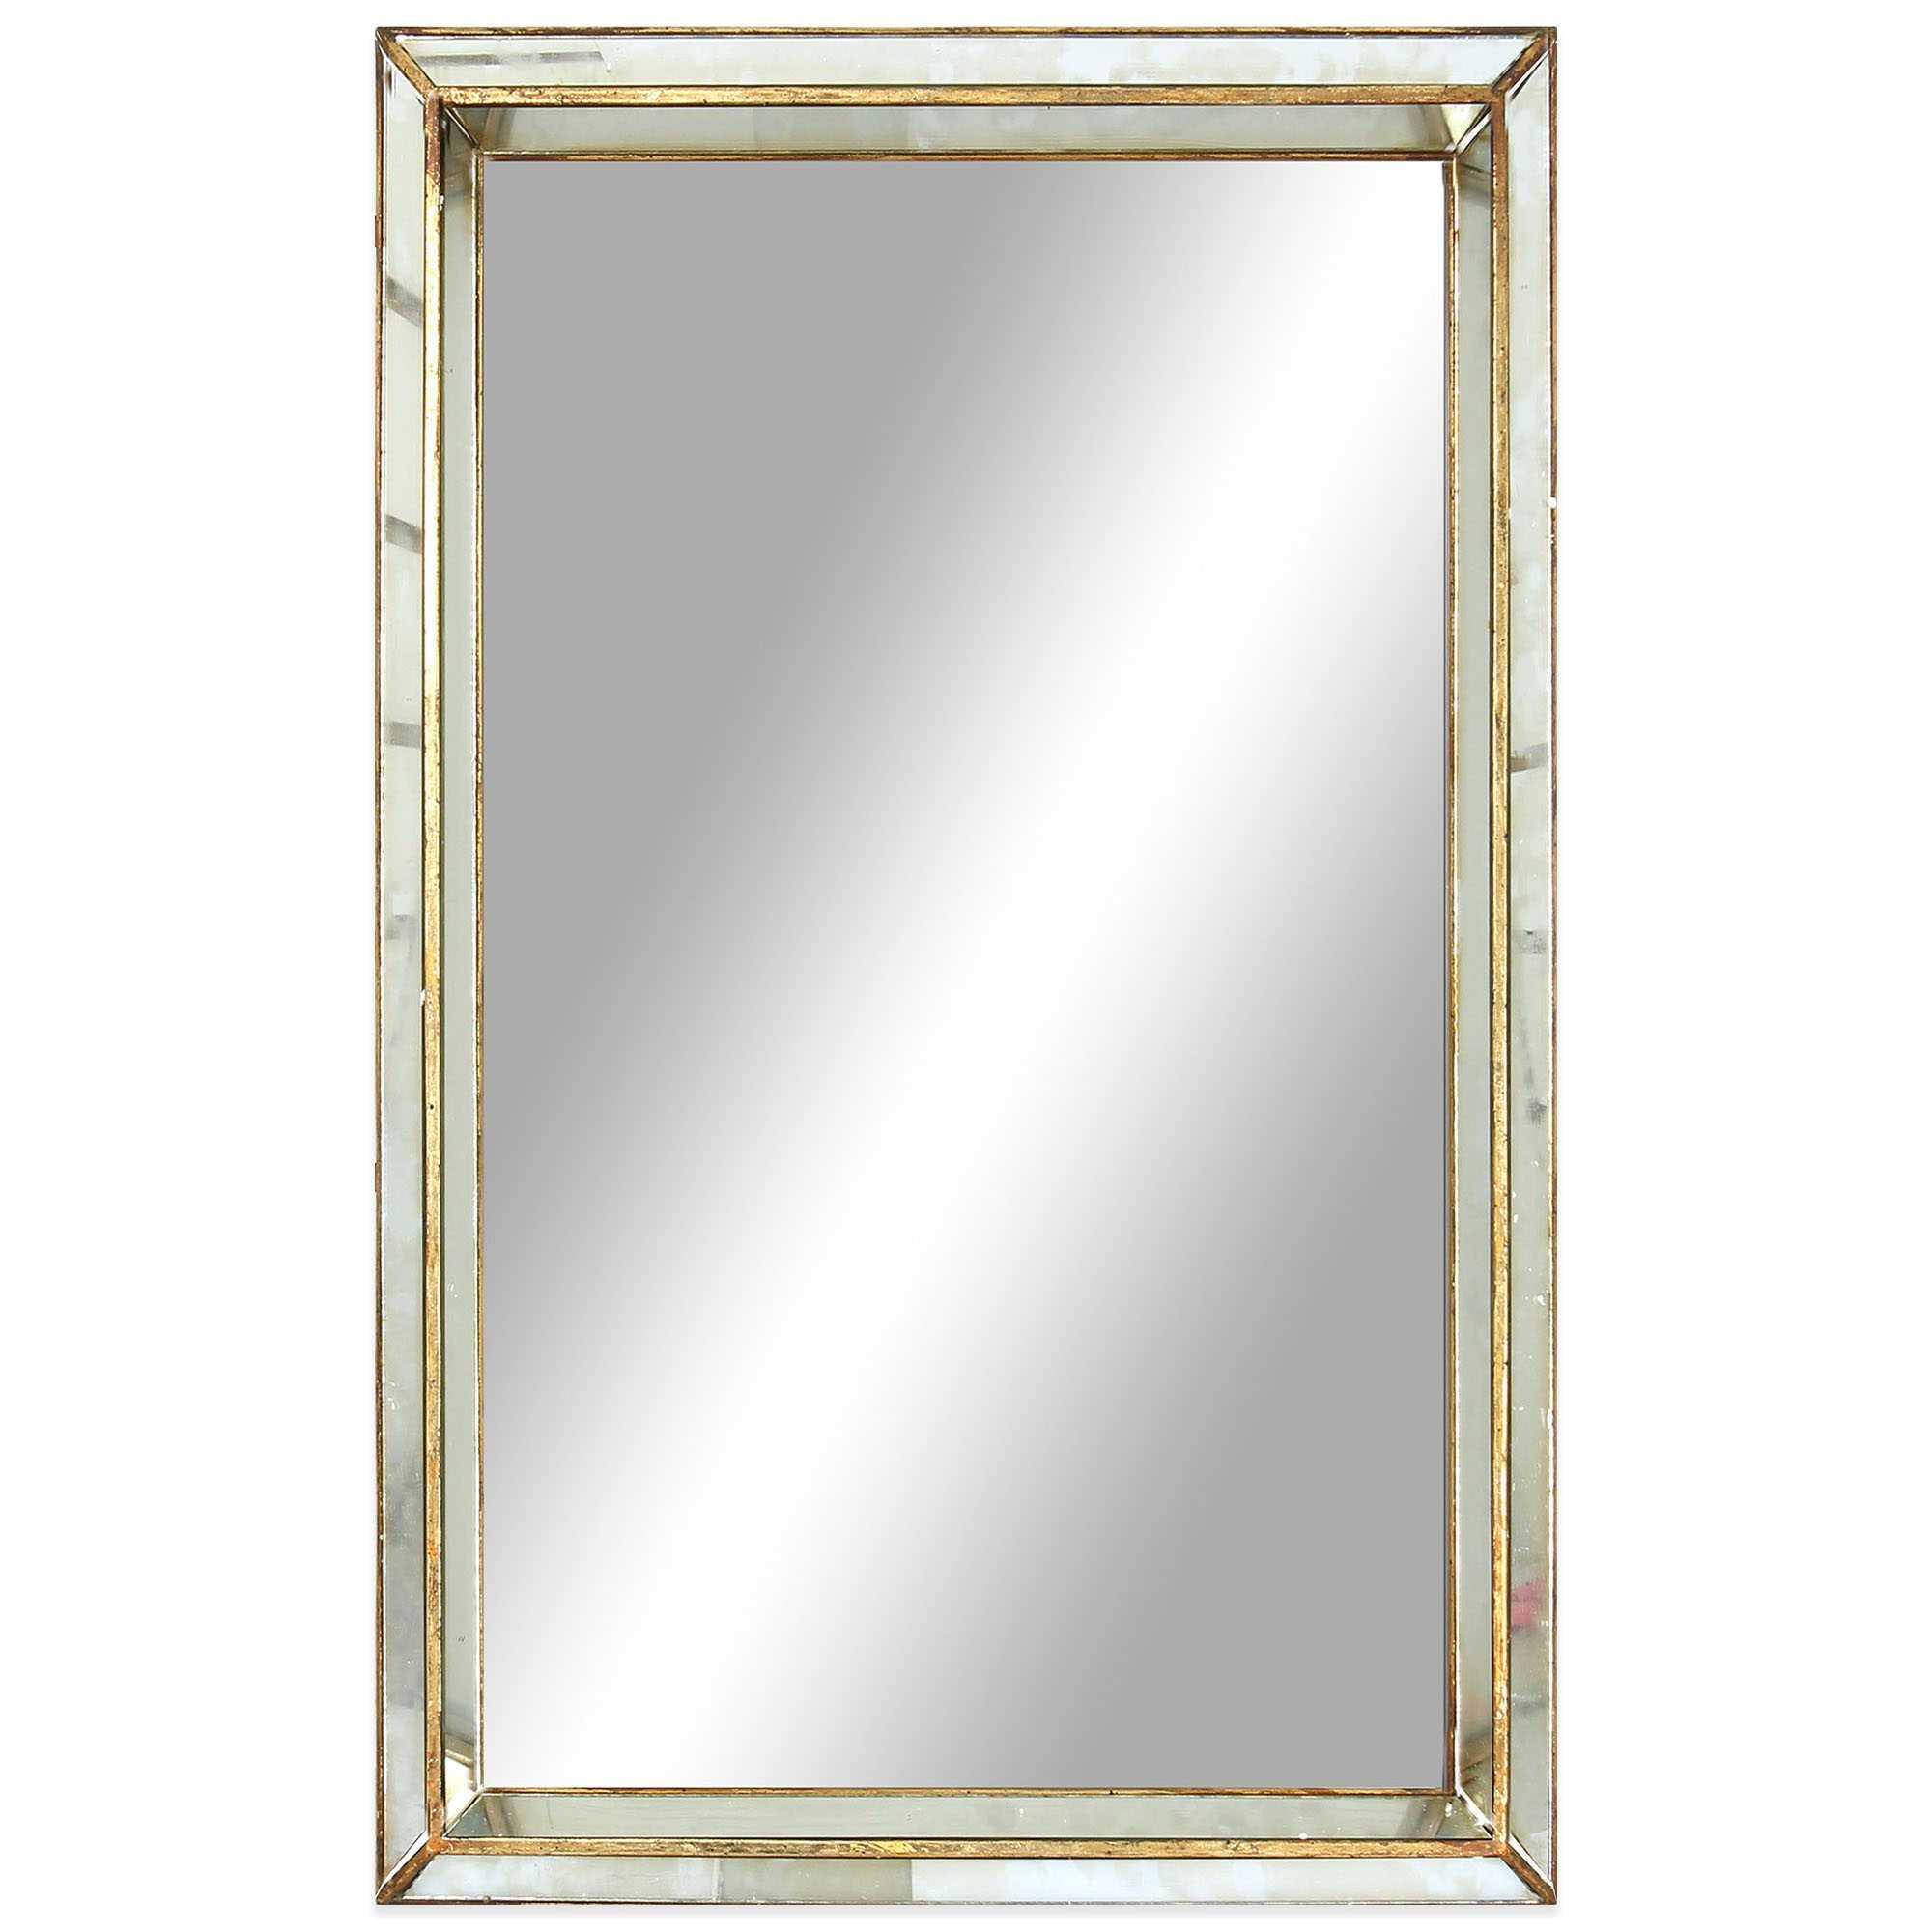 Ultra Brushed Gold Rectangular Framed Wall Mirrors Throughout Widely Used Invalid Url (View 7 of 15)